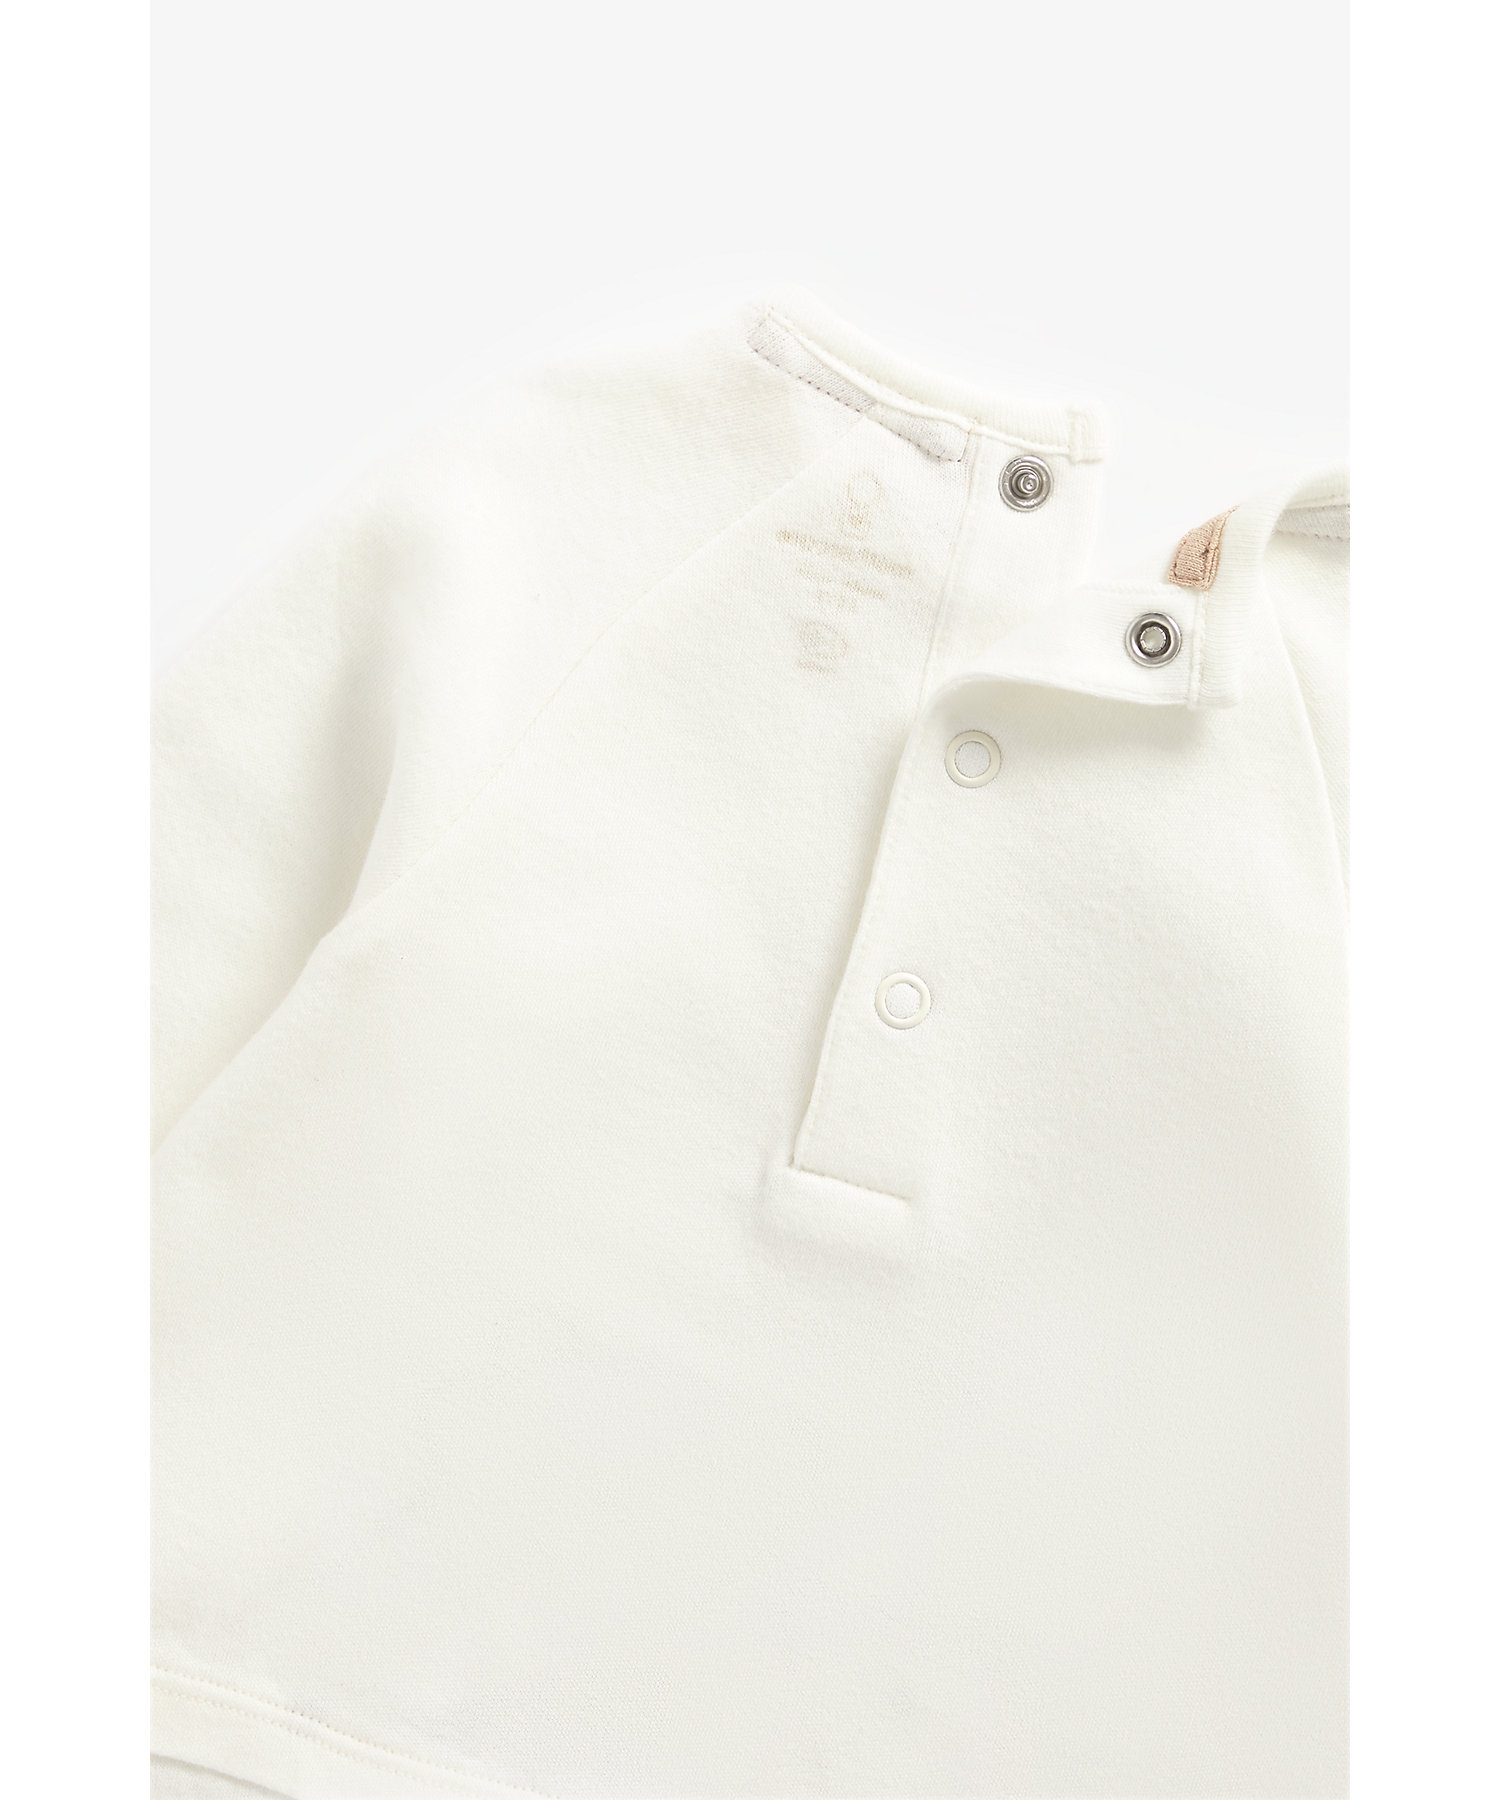 Mothercare | Unisex Full Sleeves Sleepsuits Mock Top and Bottom-White 3